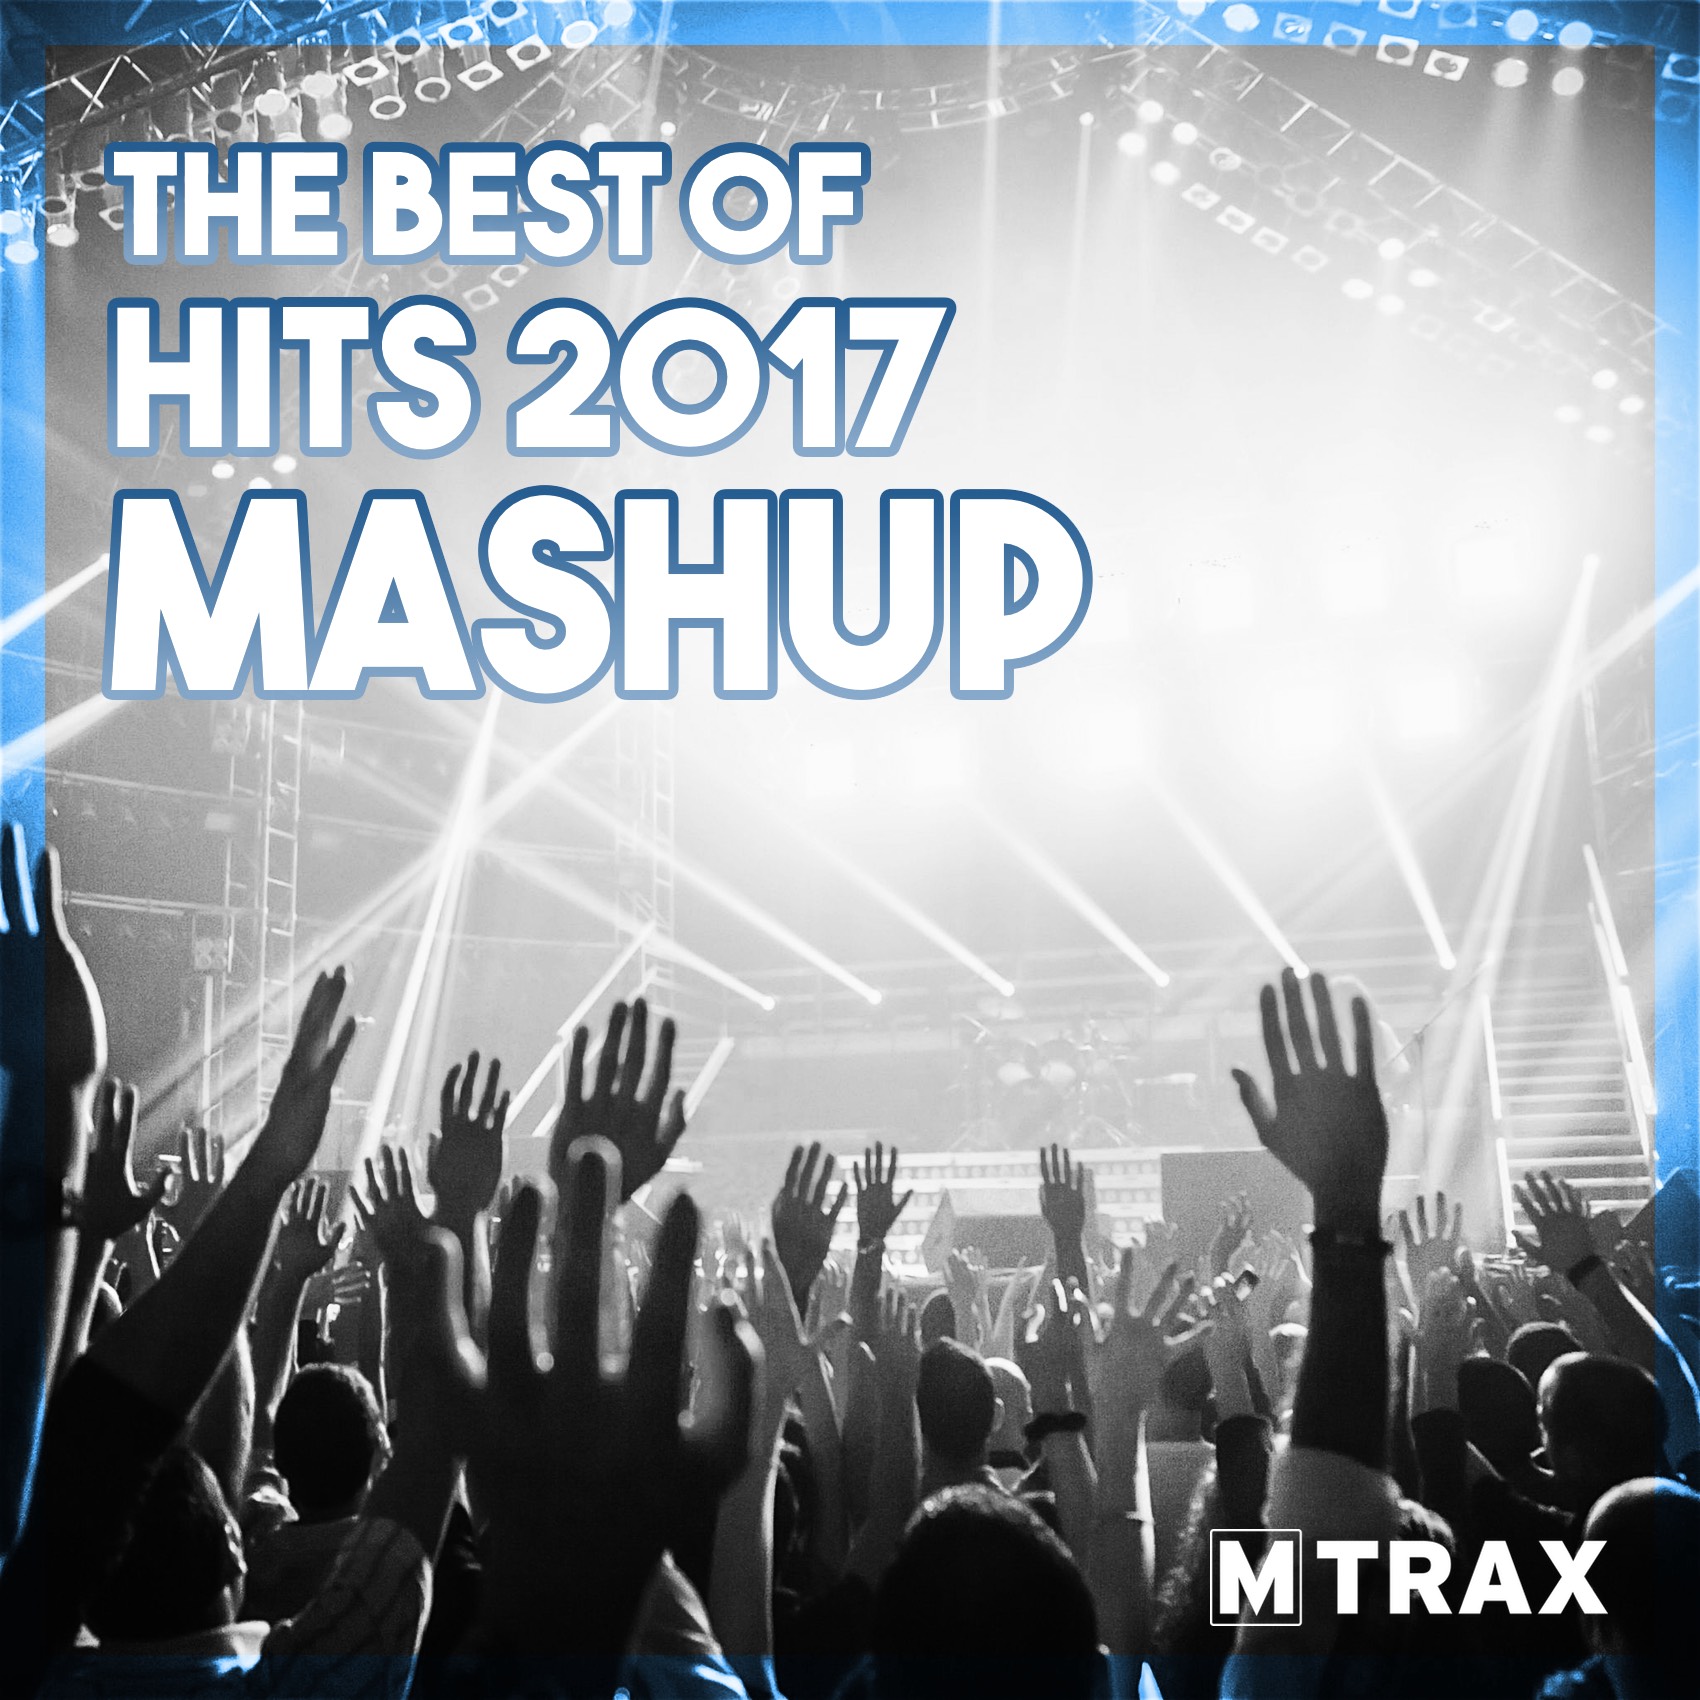 Best of Hits 2017 Mashup  MTrax Fitness Music